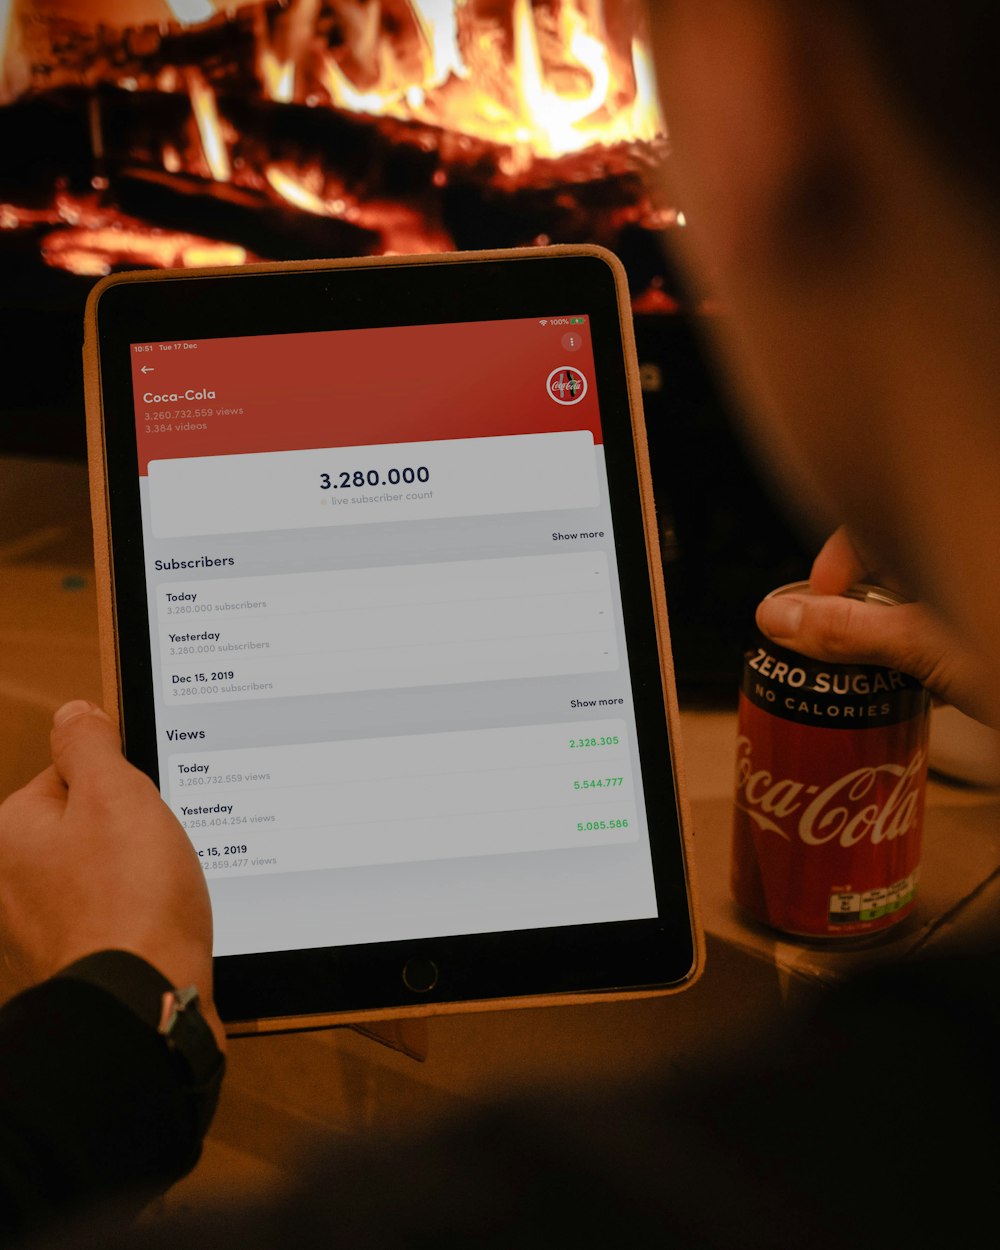 person using iPad while holding Coca-Cola soda can